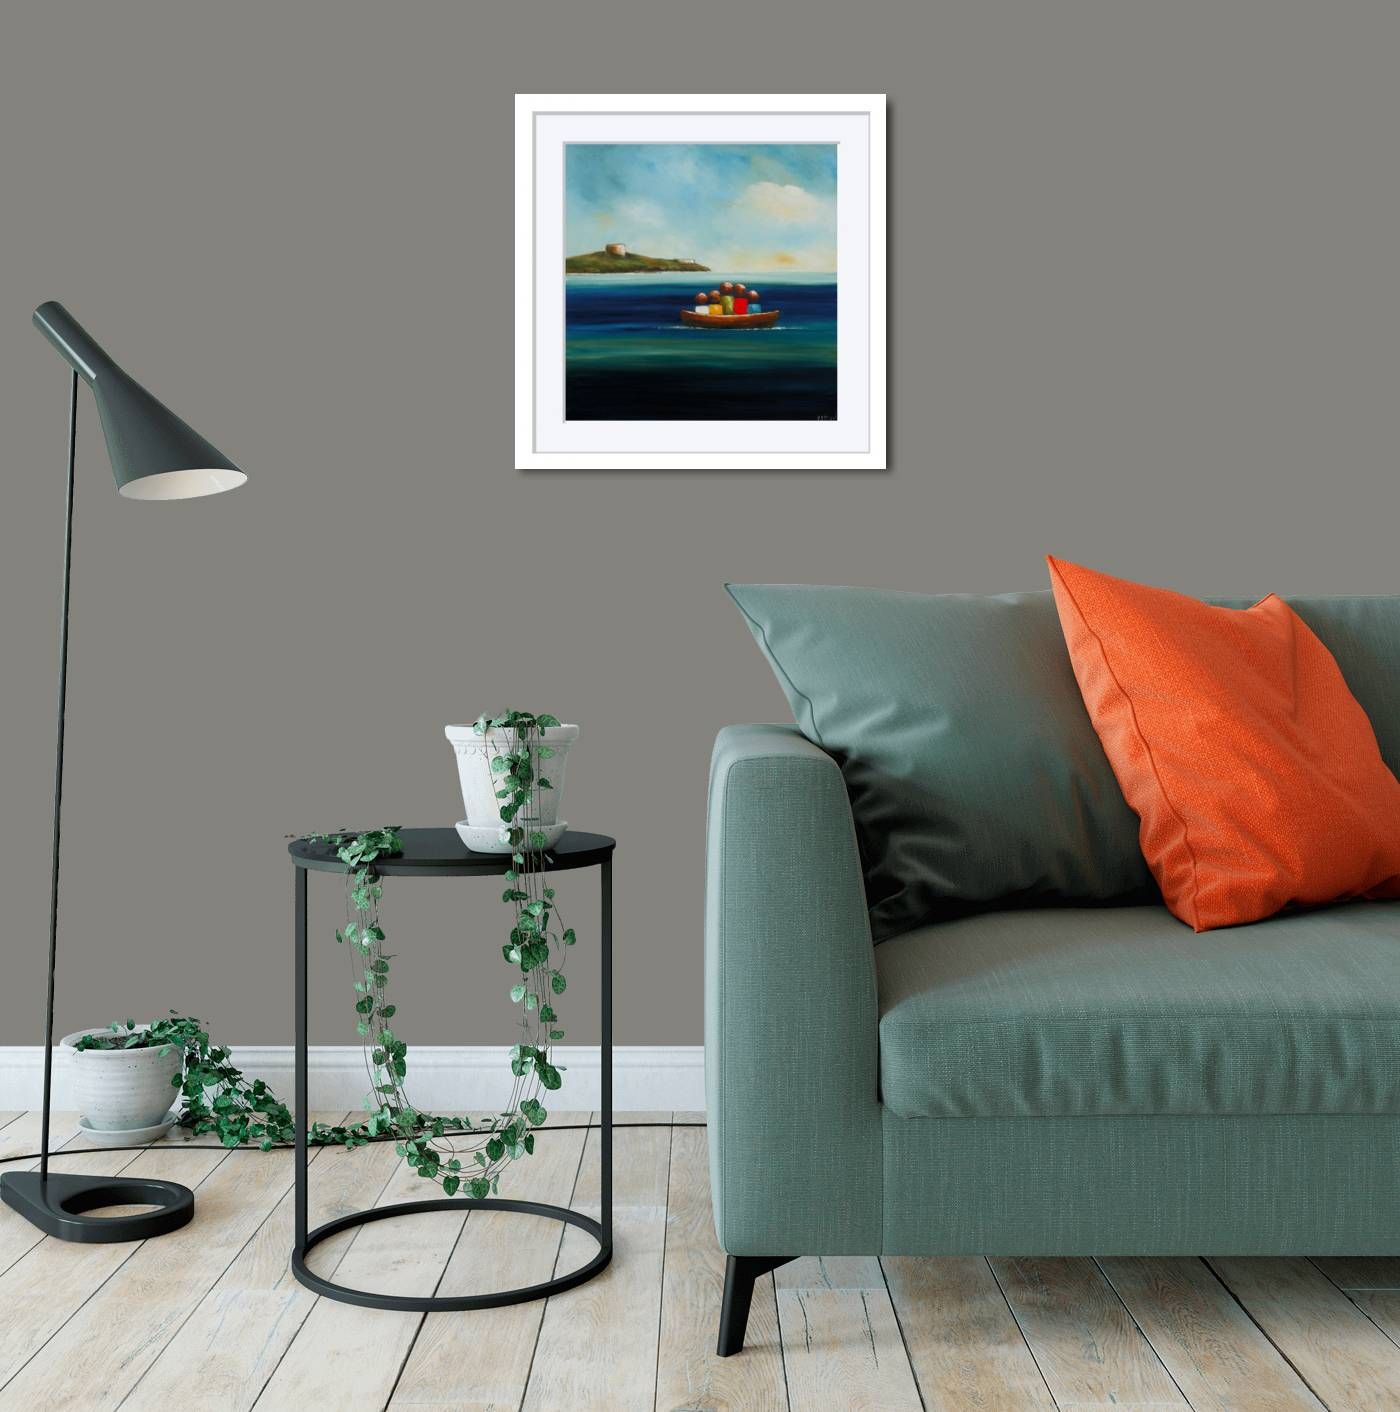 Large - The Dalkey Boaters by Padraig McCaul